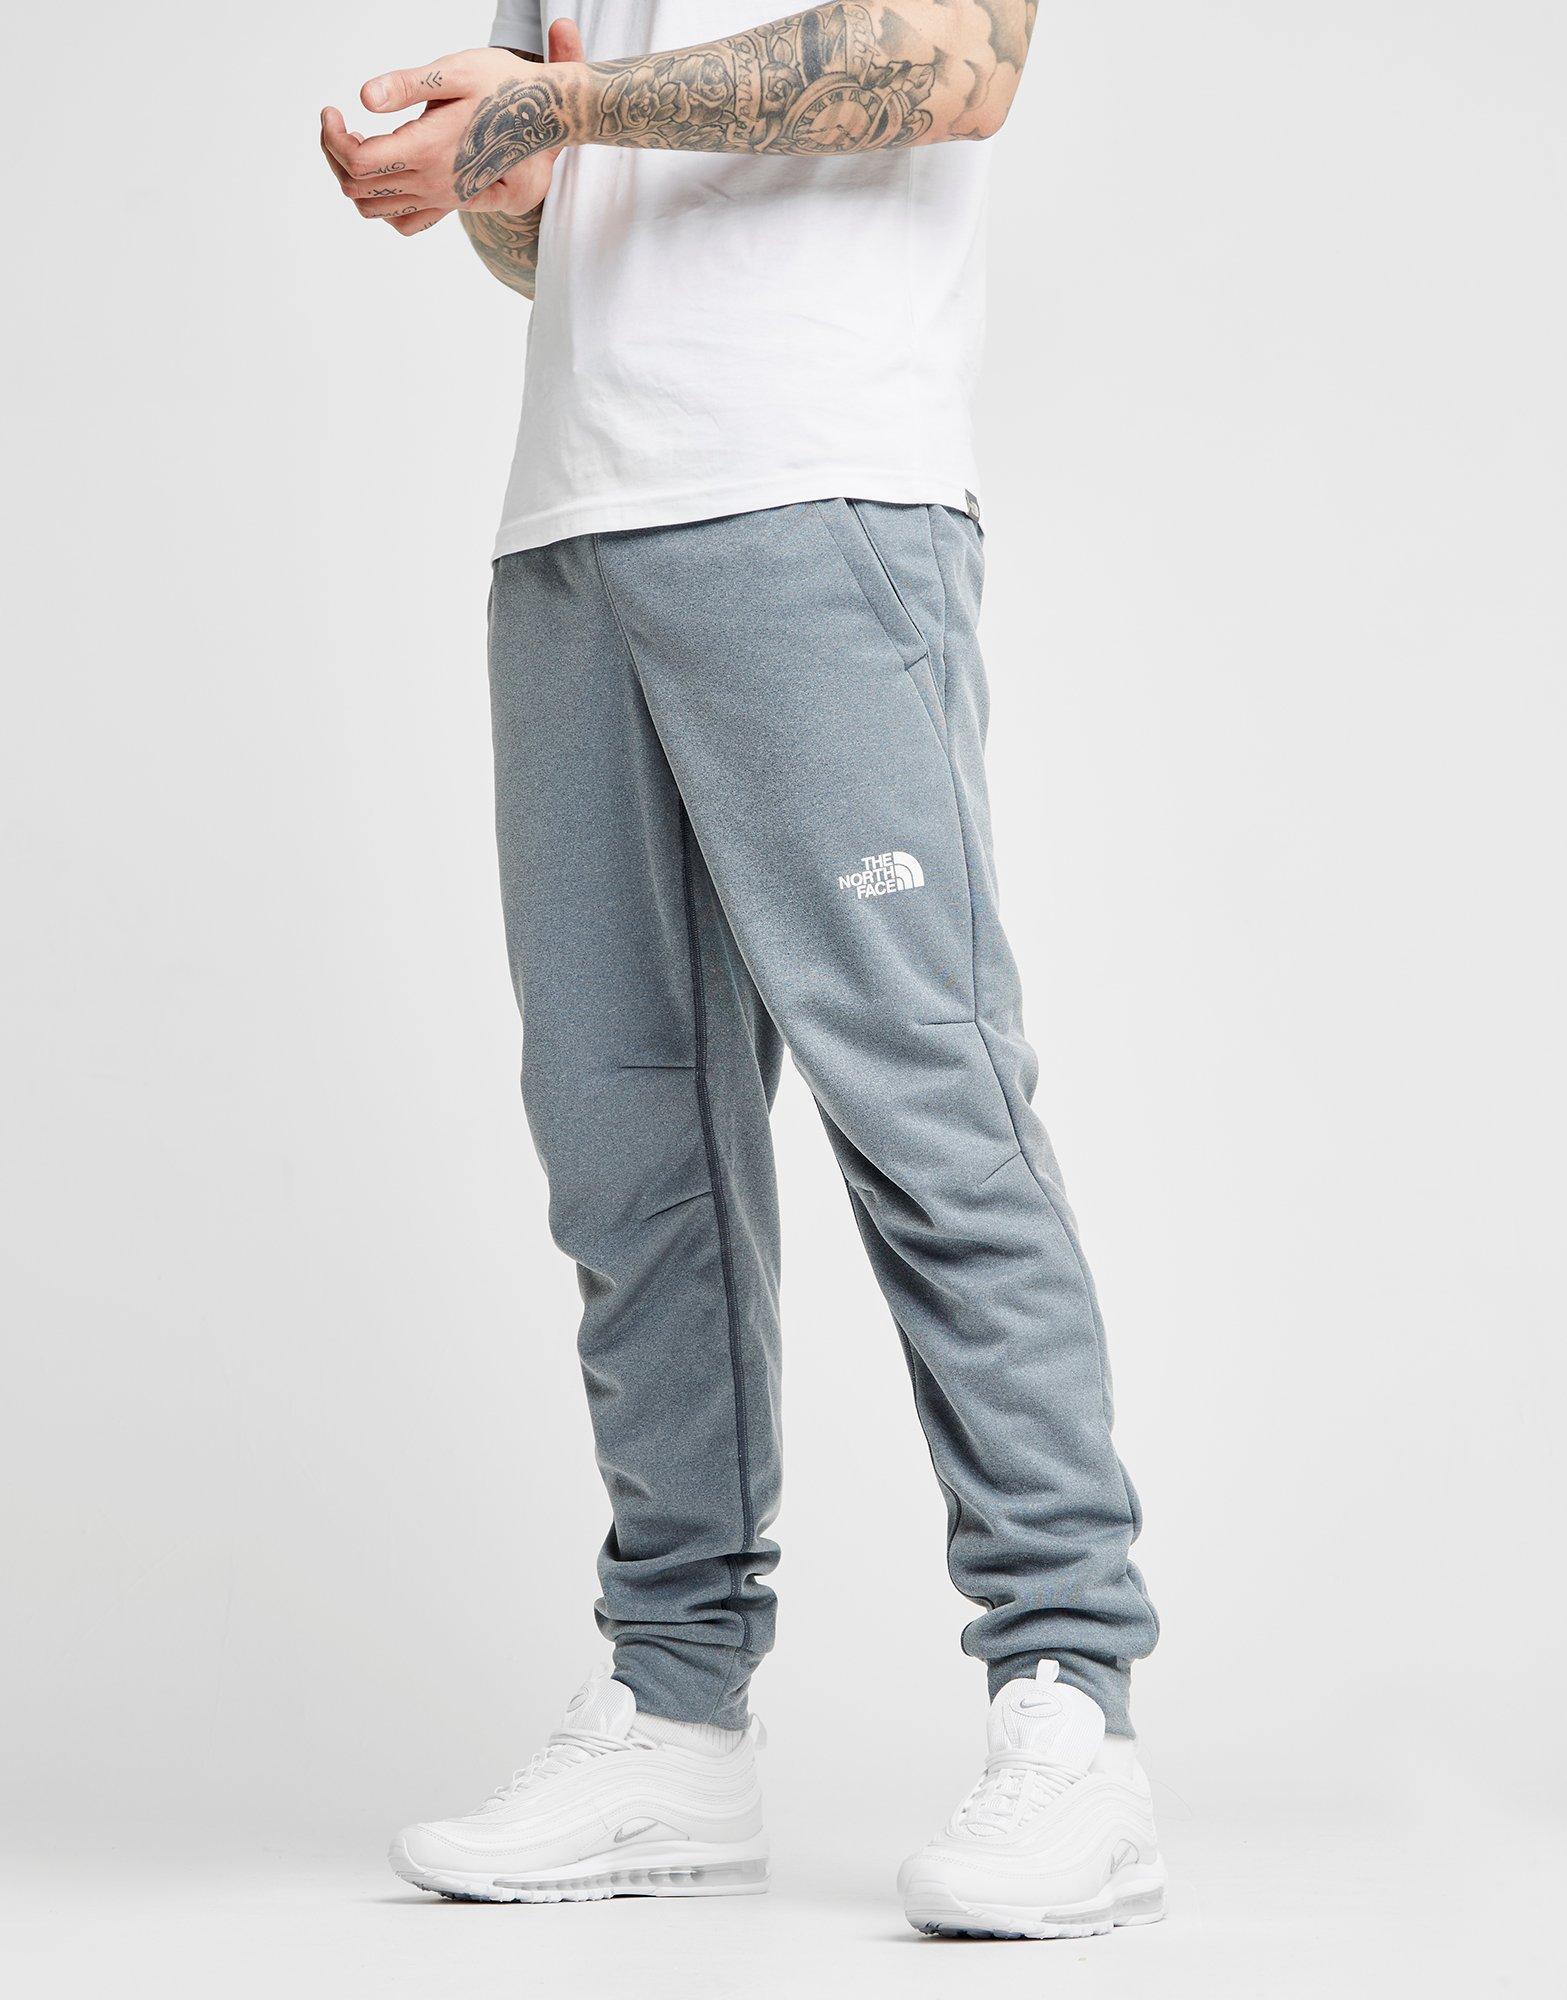 north face grey tracksuit bottoms mens